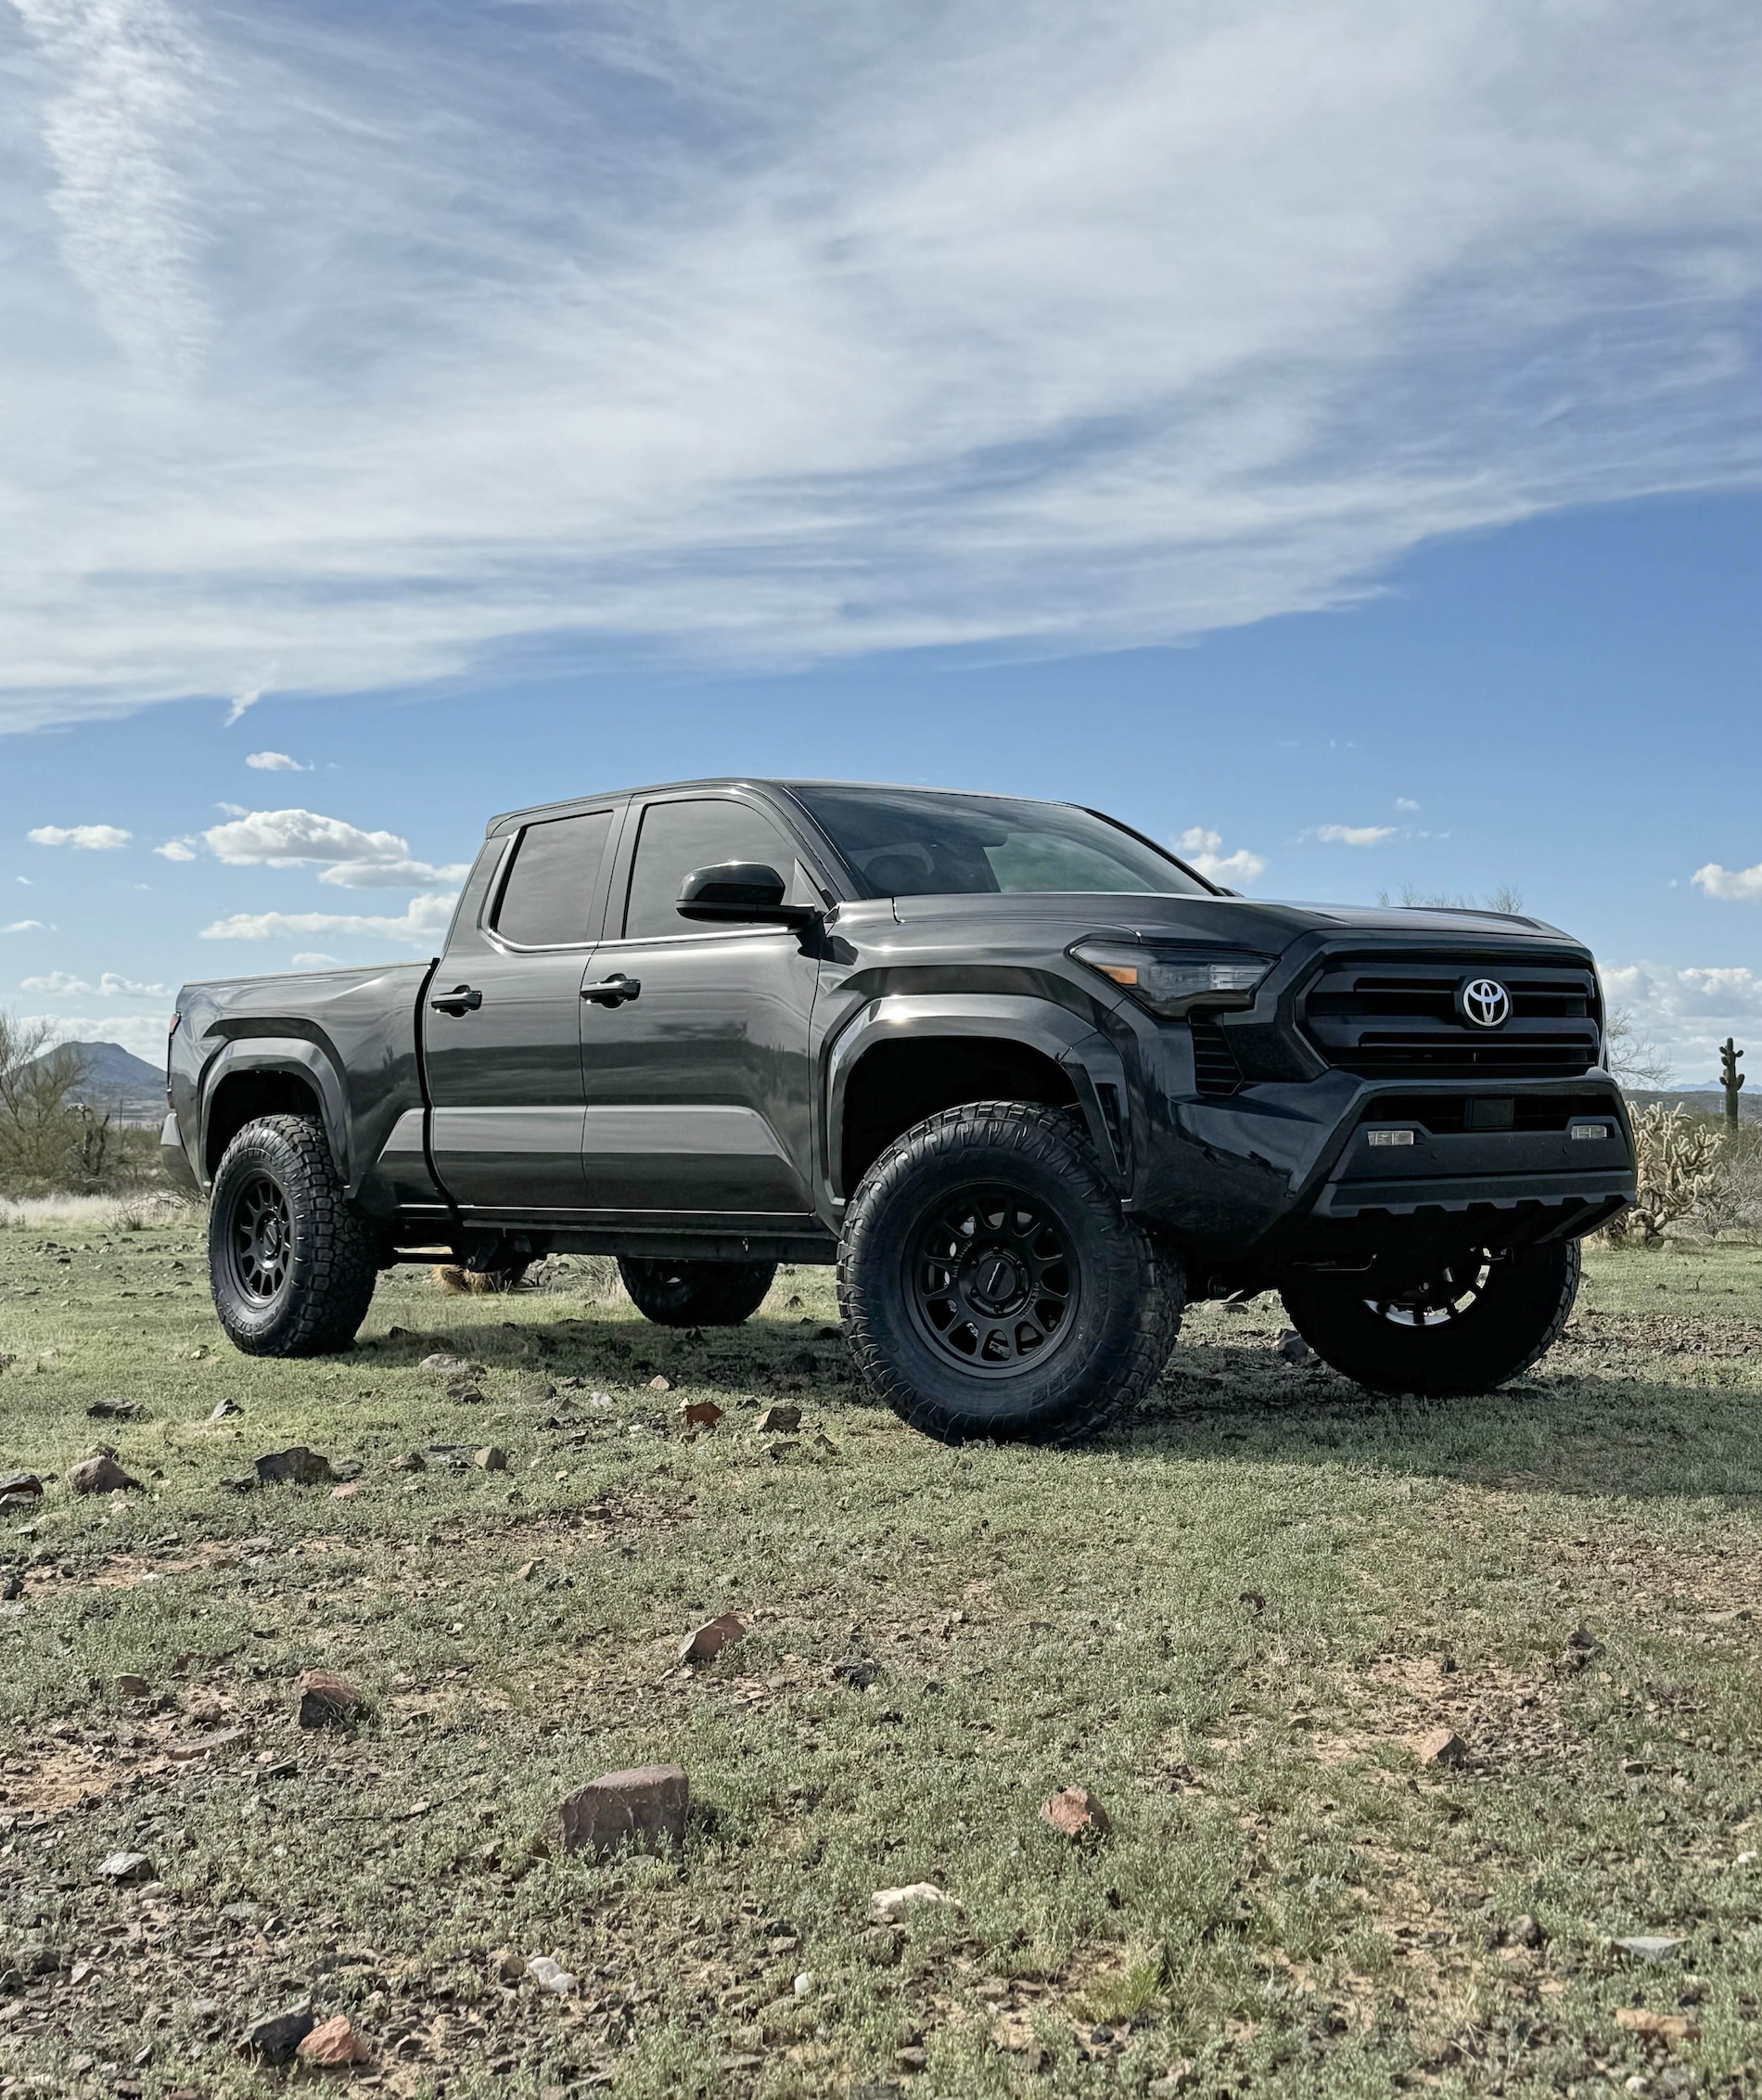 2024 Tacoma Official UNDERGROUND 2024 Tacoma Thread (4th Gen) 2024 Tacoma 4th gen build Toyo Open Country AT3 285:75 and Method 703 +35 offset 1